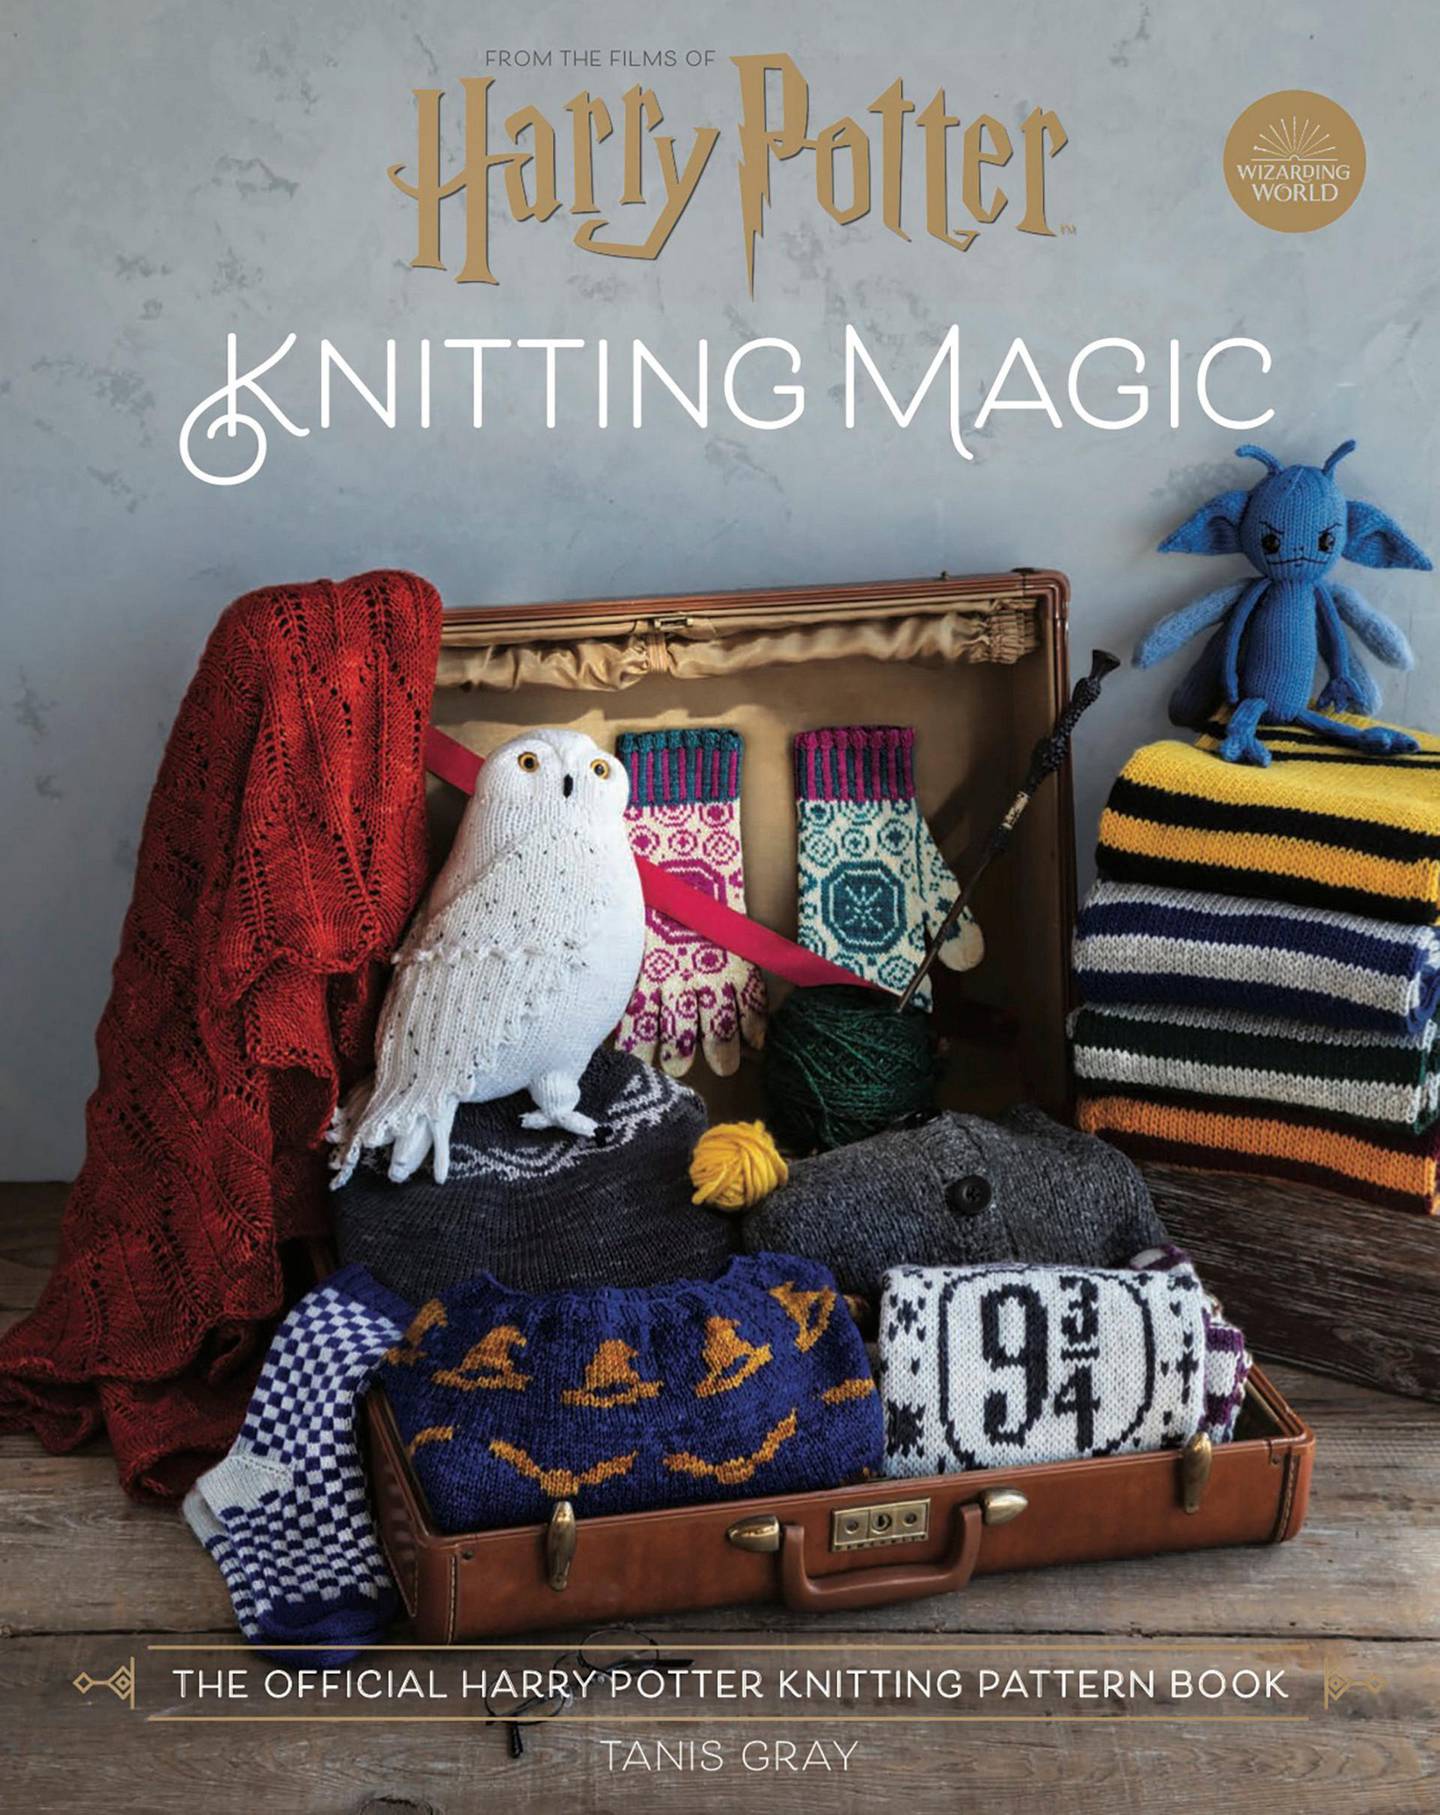 'Harry Potter: Knitting Magic' by Tanis Gray